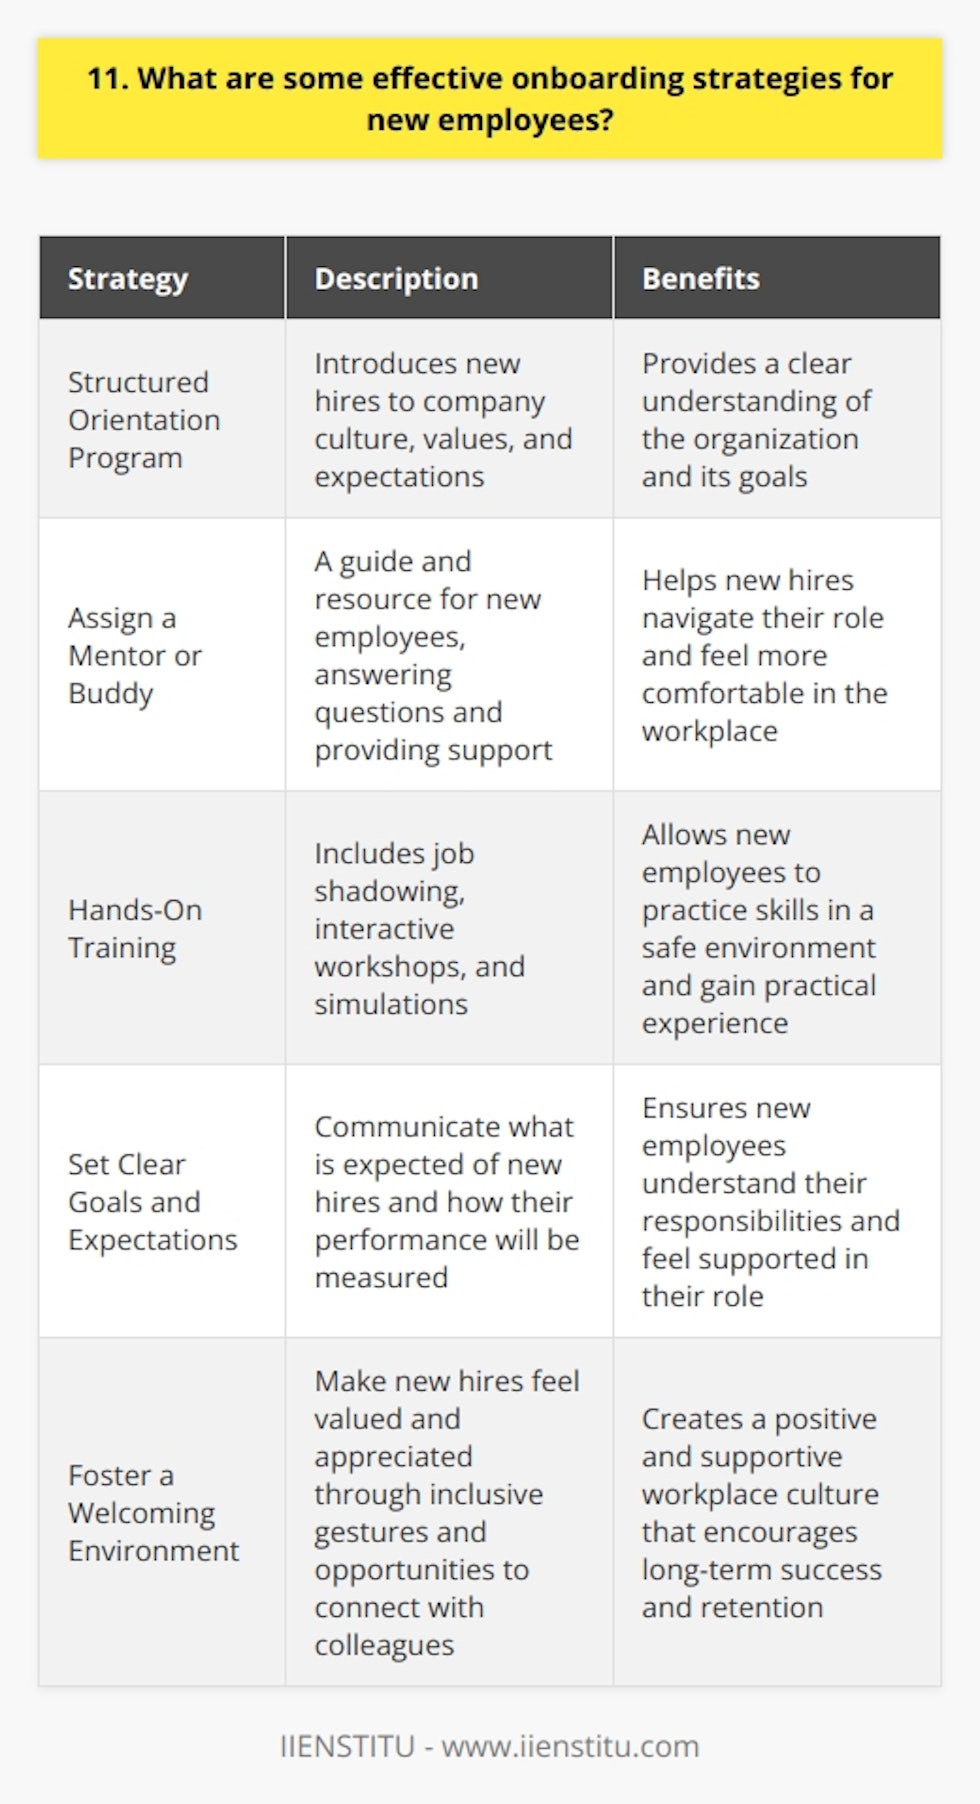 When it comes to onboarding new employees, I believe there are several effective strategies that can make a real difference. First and foremost, its crucial to have a well-structured orientation program that introduces new hires to the company culture, values, and expectations. Assign a Mentor or Buddy In my experience, assigning a mentor or buddy to each new employee can be incredibly helpful. This person can serve as a guide and resource, answering questions and providing support as the new hire navigates their new role. I remember when I started my first job out of college, my mentor was invaluable in helping me understand the companys processes and procedures. Provide Hands-On Training Another effective strategy is to provide hands-on training opportunities. This could include job shadowing, where the new employee observes a more experienced colleague performing their job duties. It could also involve interactive workshops or simulations that allow the new hire to practice their skills in a safe environment. Set Clear Goals and Expectations I think its also important to set clear goals and expectations from the very beginning. This helps new employees understand what is expected of them and how their performance will be measured. Regular check-ins and feedback sessions can help ensure that new hires are on track and feel supported. Foster a Welcoming Environment Finally, I believe that fostering a welcoming and inclusive environment is key to successful onboarding. This means making sure that new hires feel valued and appreciated, and that they have opportunities to connect with their colleagues on a personal level. Simple gestures like a welcome lunch or a personalized welcome gift can go a long way in making new employees feel at home. Overall, effective onboarding requires a combination of structure, support, and inclusivity. By investing time and resources into this process, companies can set their new hires up for long-term success and retention.